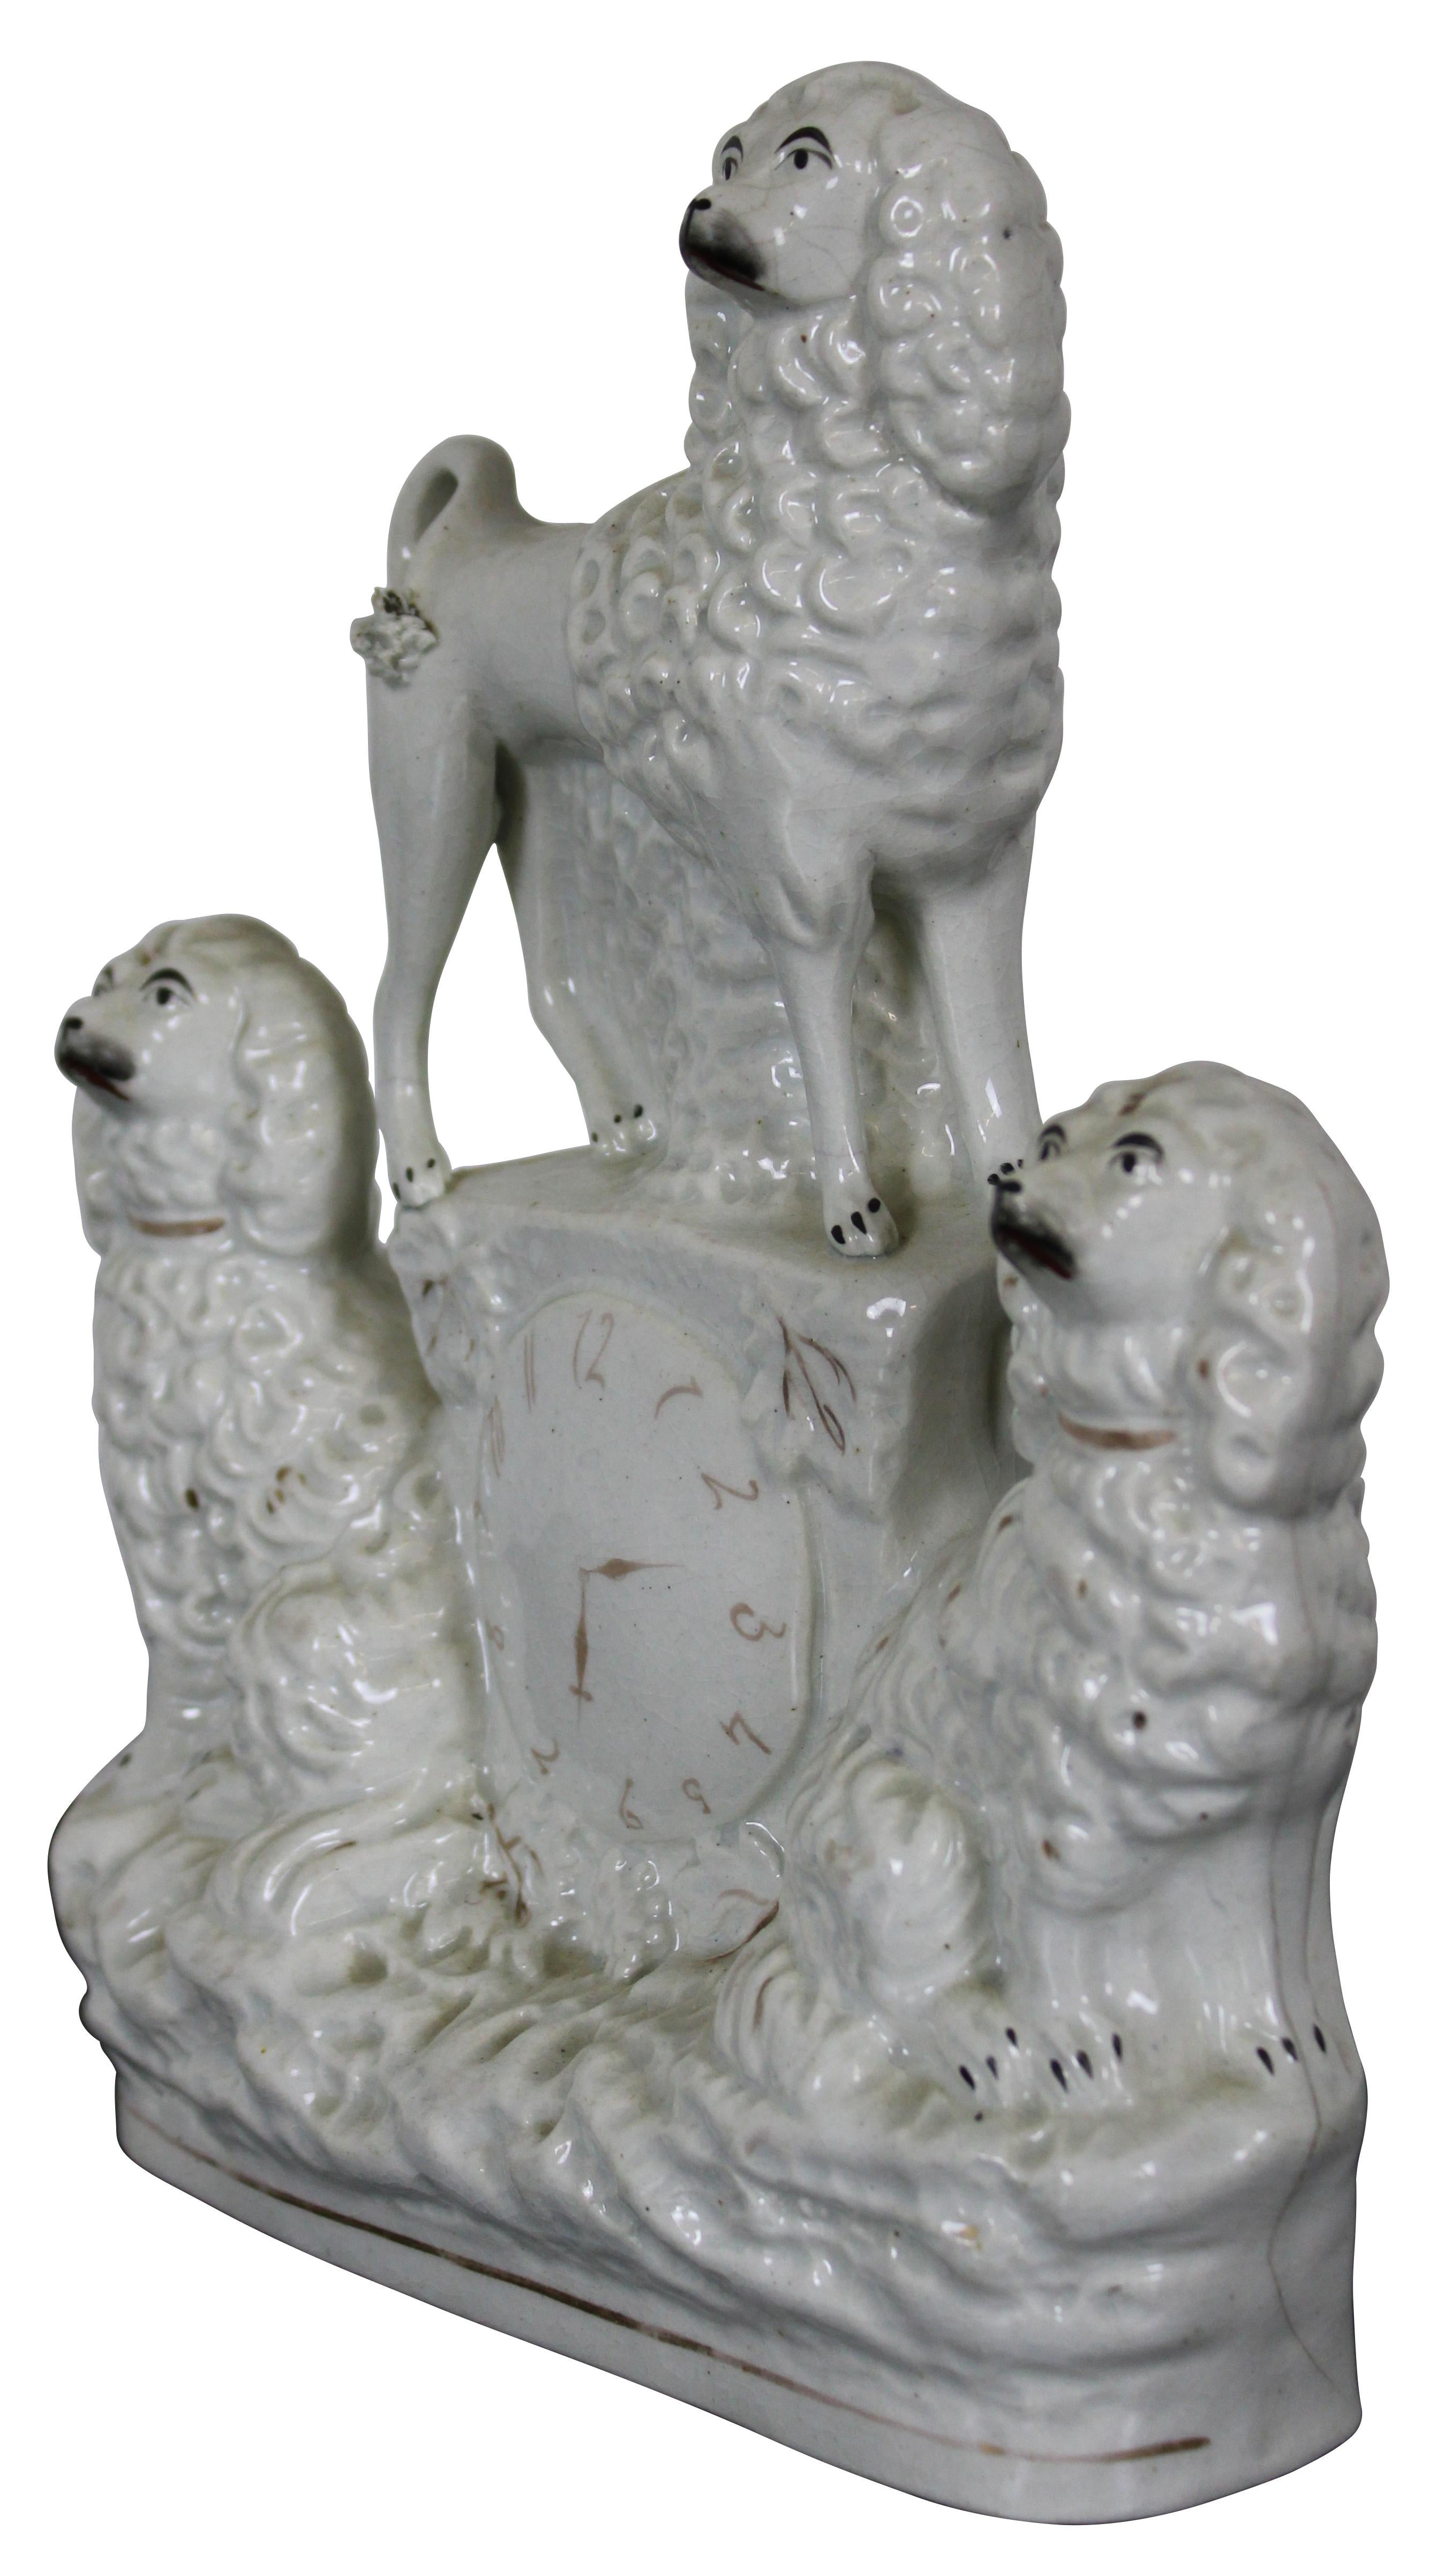 Antique 19th century Staffordshire porcelain figurine featuring a faux clock flanked by a pair of seated King Charles Spaniels and topped with a standing poodle.
 